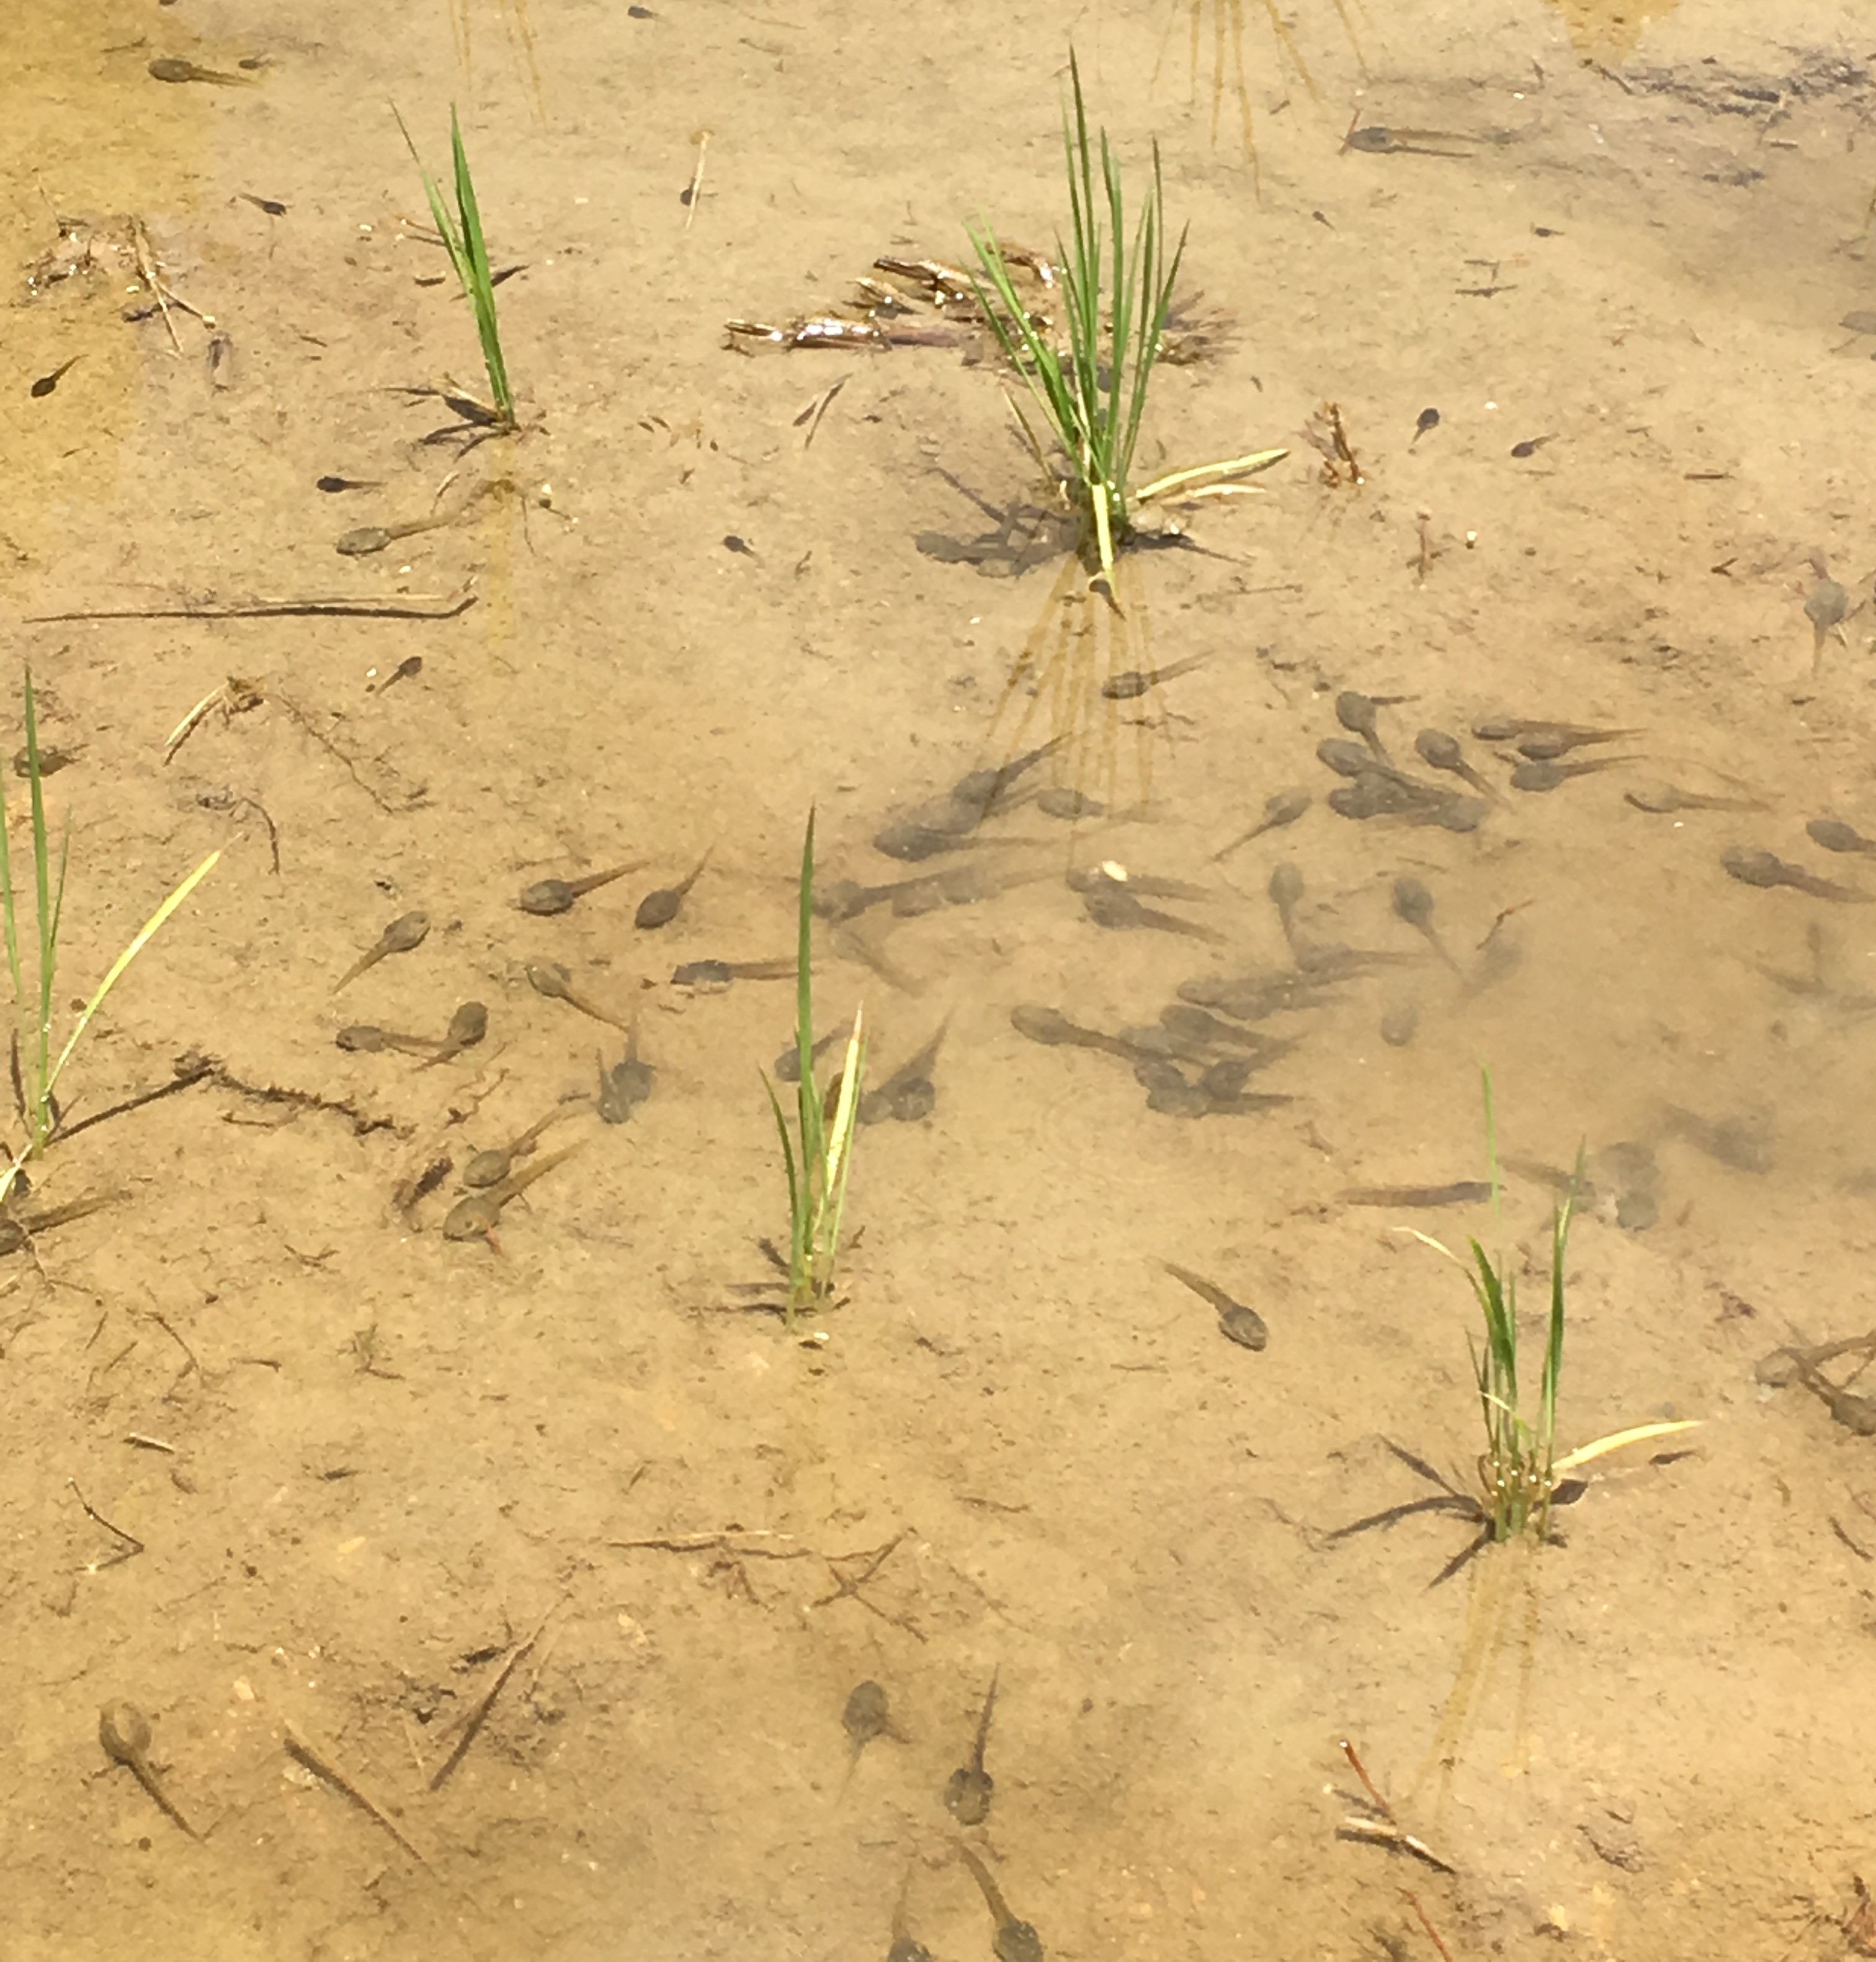 tonosama gearu tadpoles in a shallow water filled rice paddy